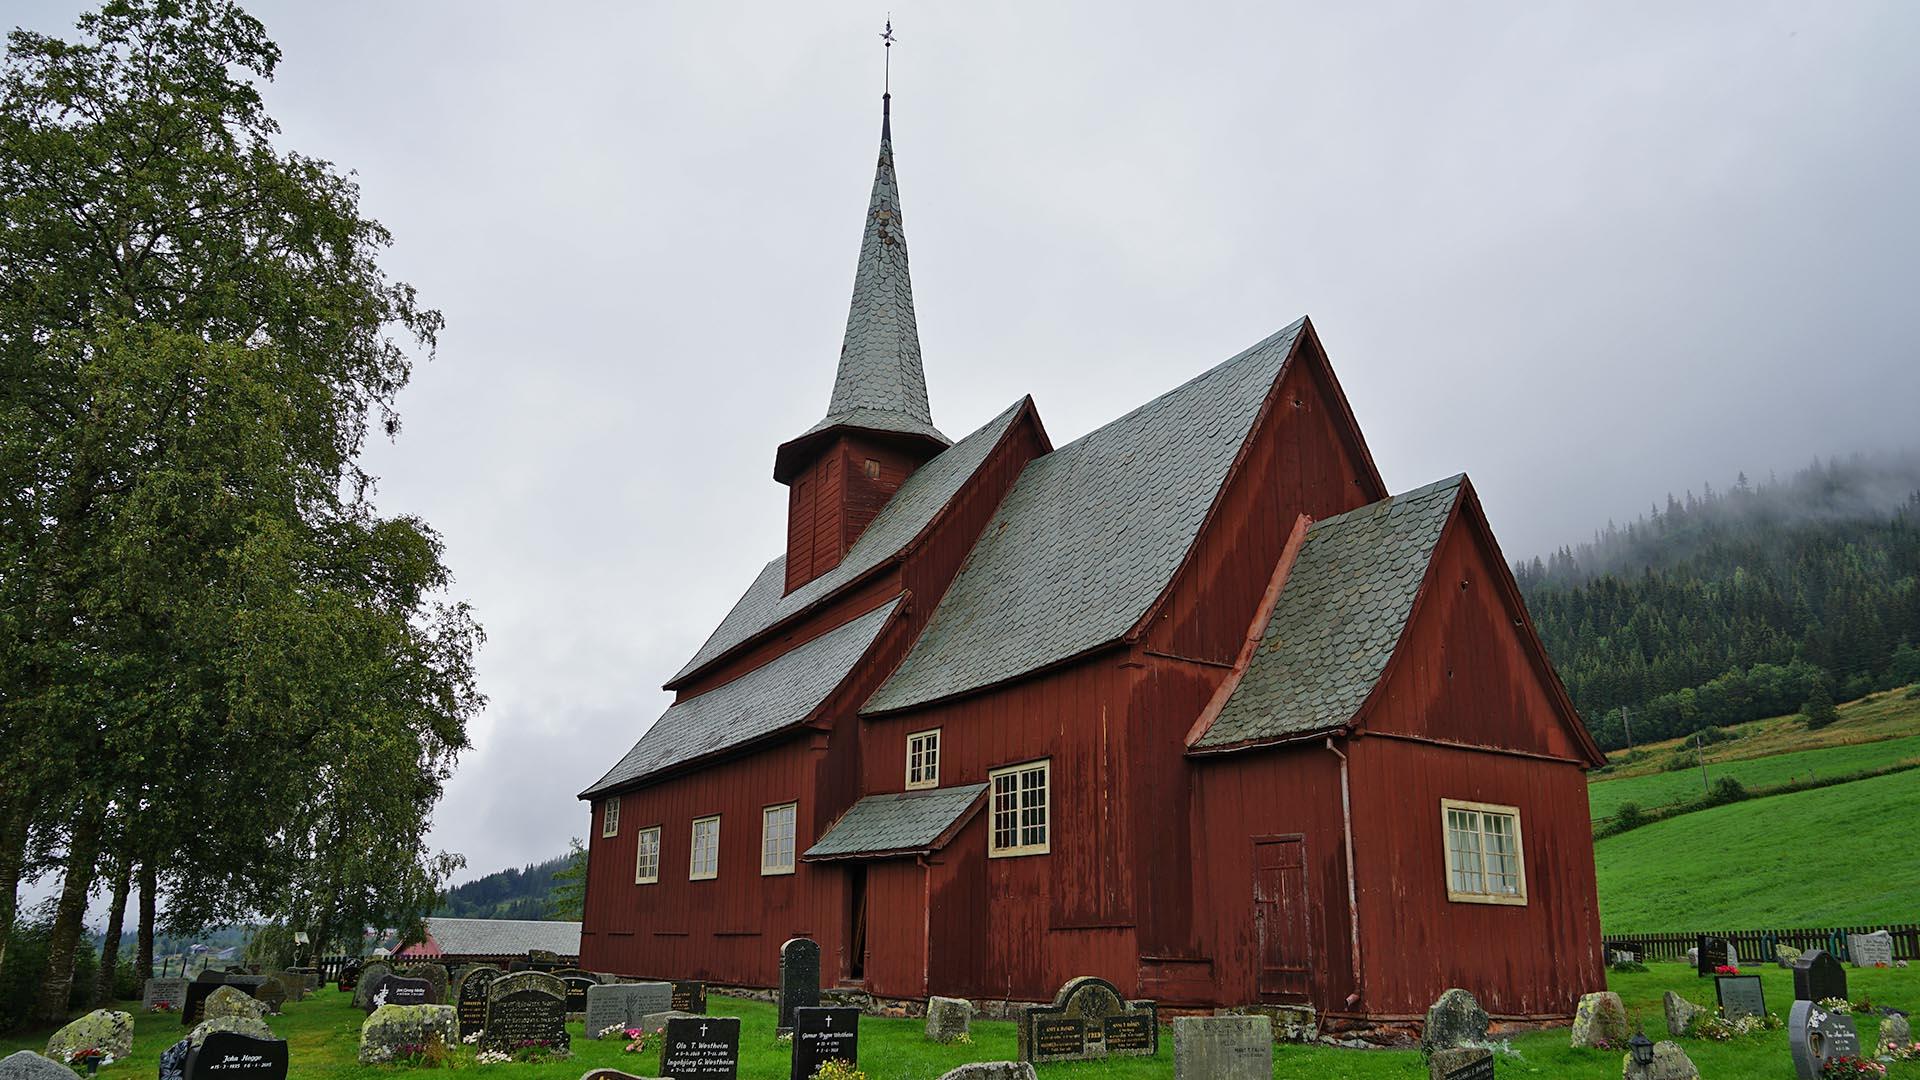 A grey summersday, green grass, a cemetary surrounding a stave church painted in dark rusty red.